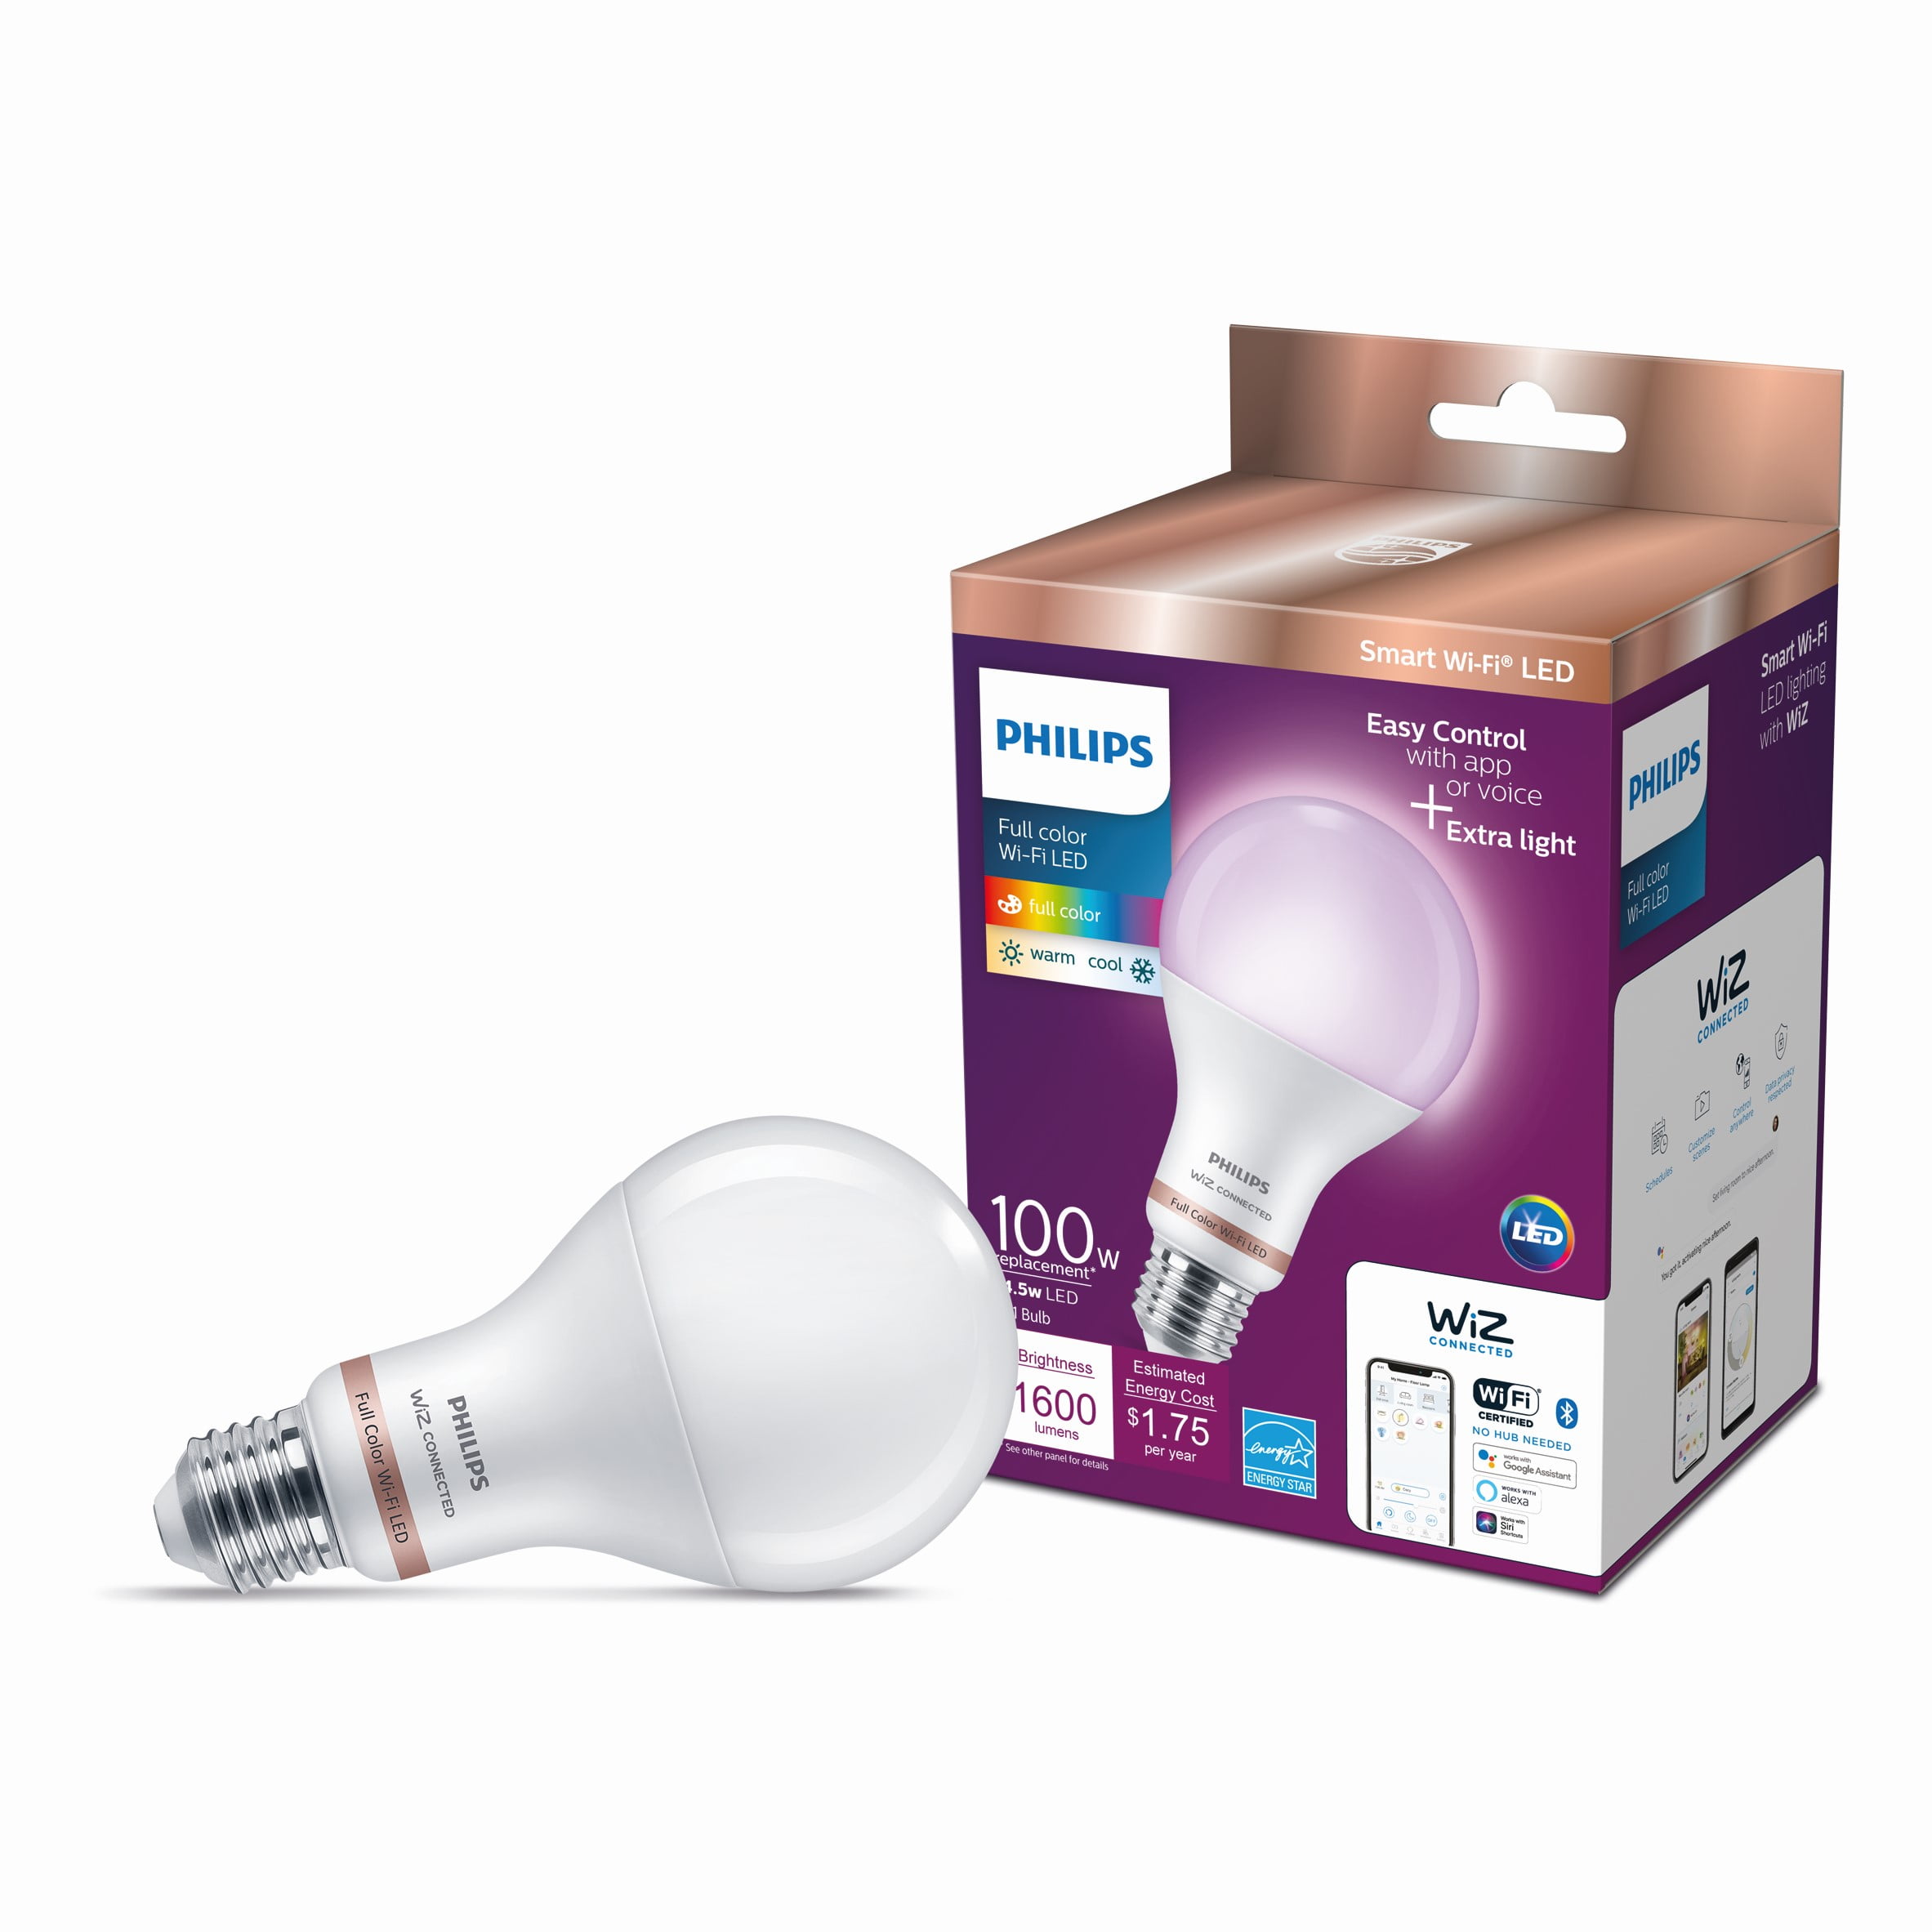 Philips Smart LED 100-Watt A21 General Purpose Light Bulb, Frosted Color, Dimmable, E26 Medium Base (1-Pack)